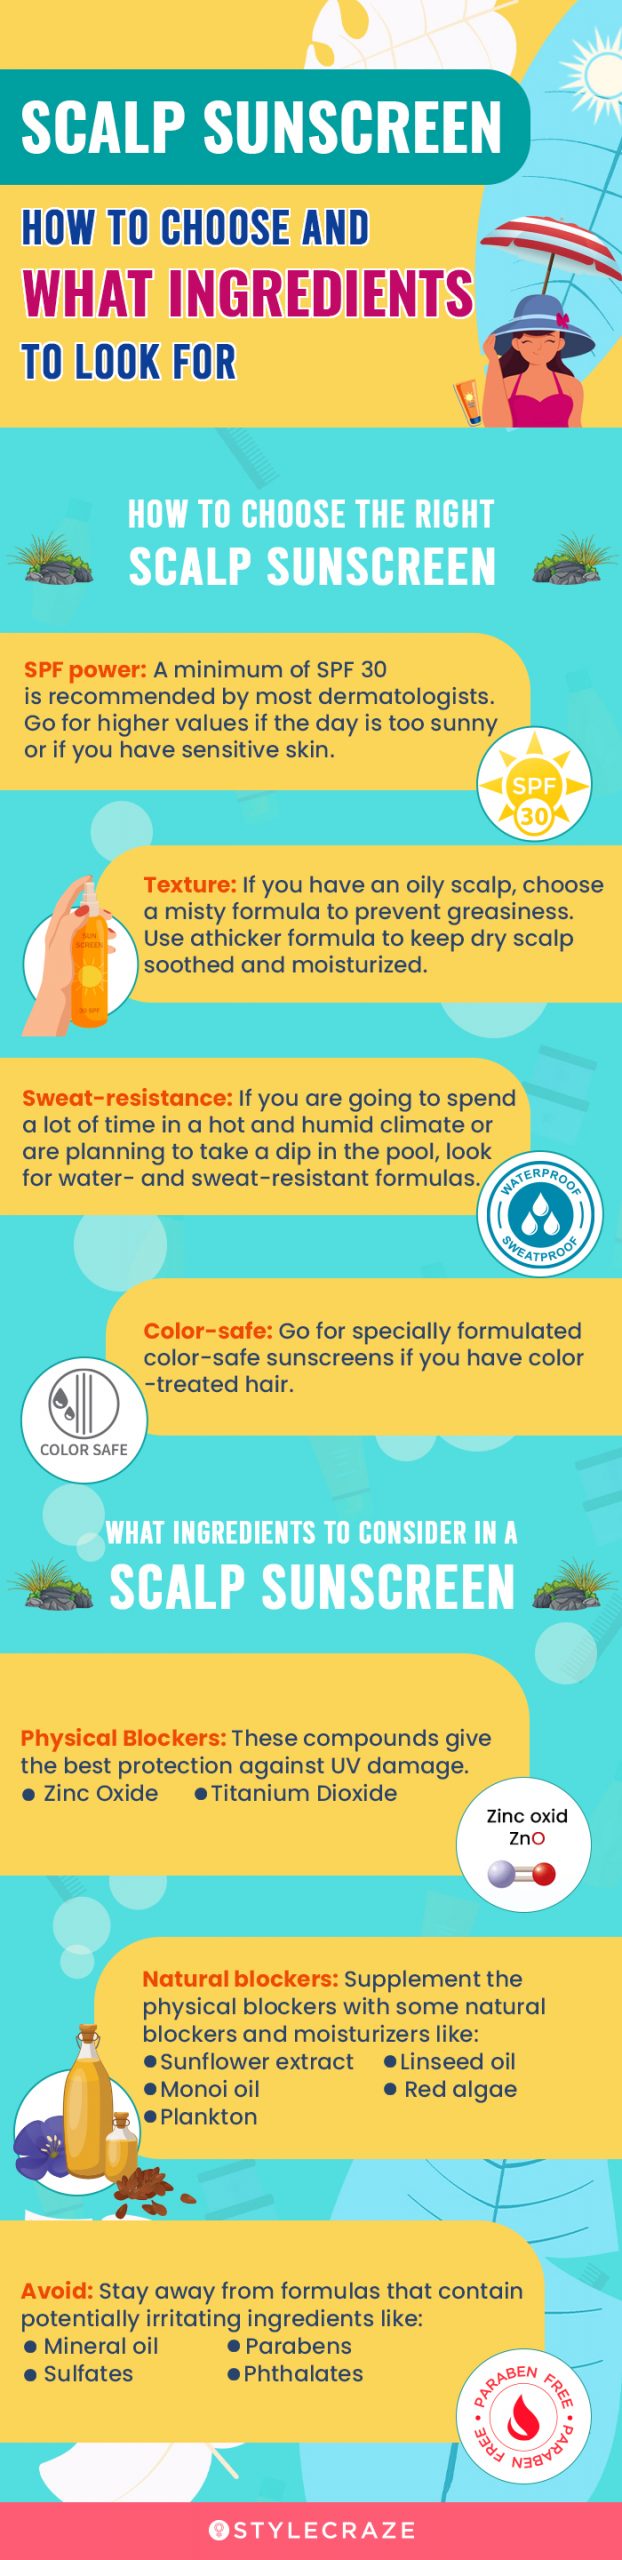 Scalp Sunscreen: How To Choose And What Ingredients To Look For